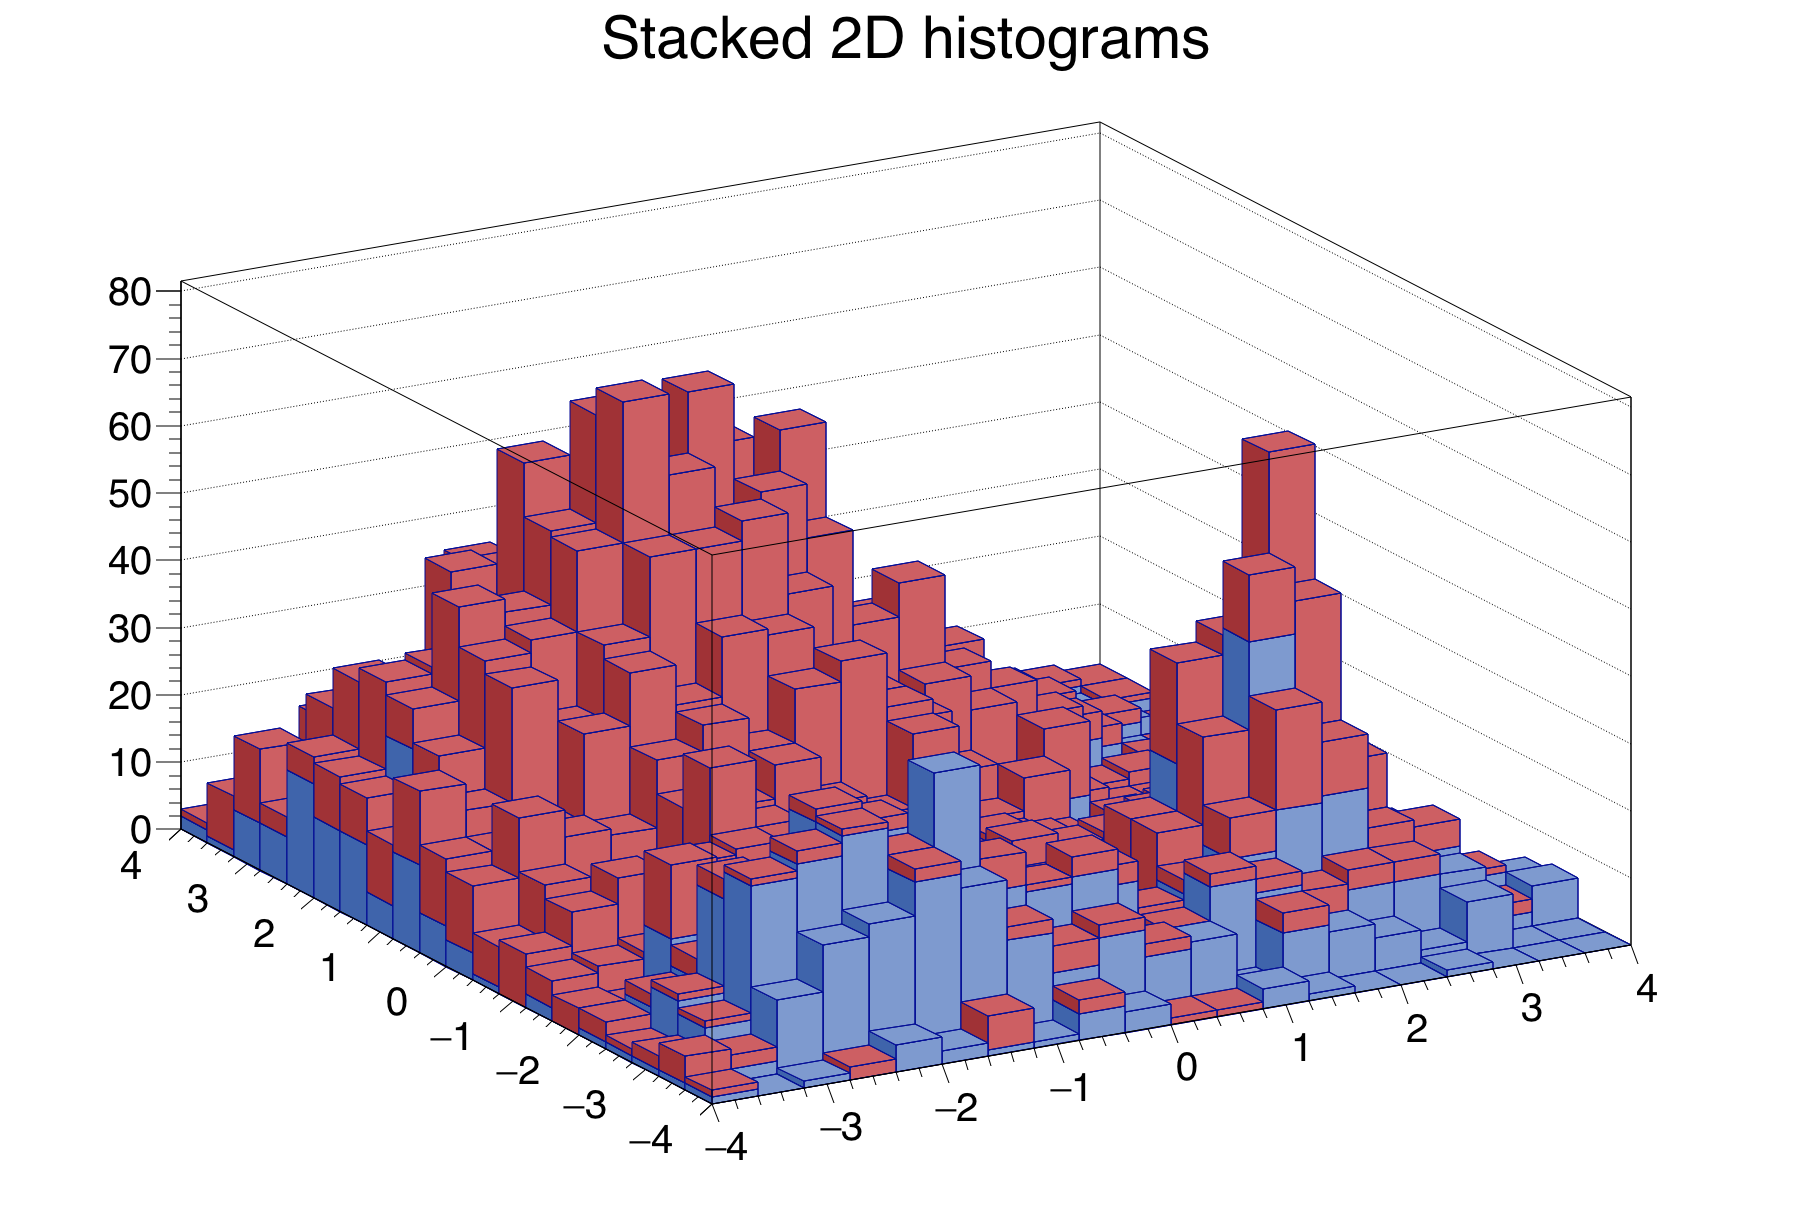 Two 2D histograms stack on top of each other.